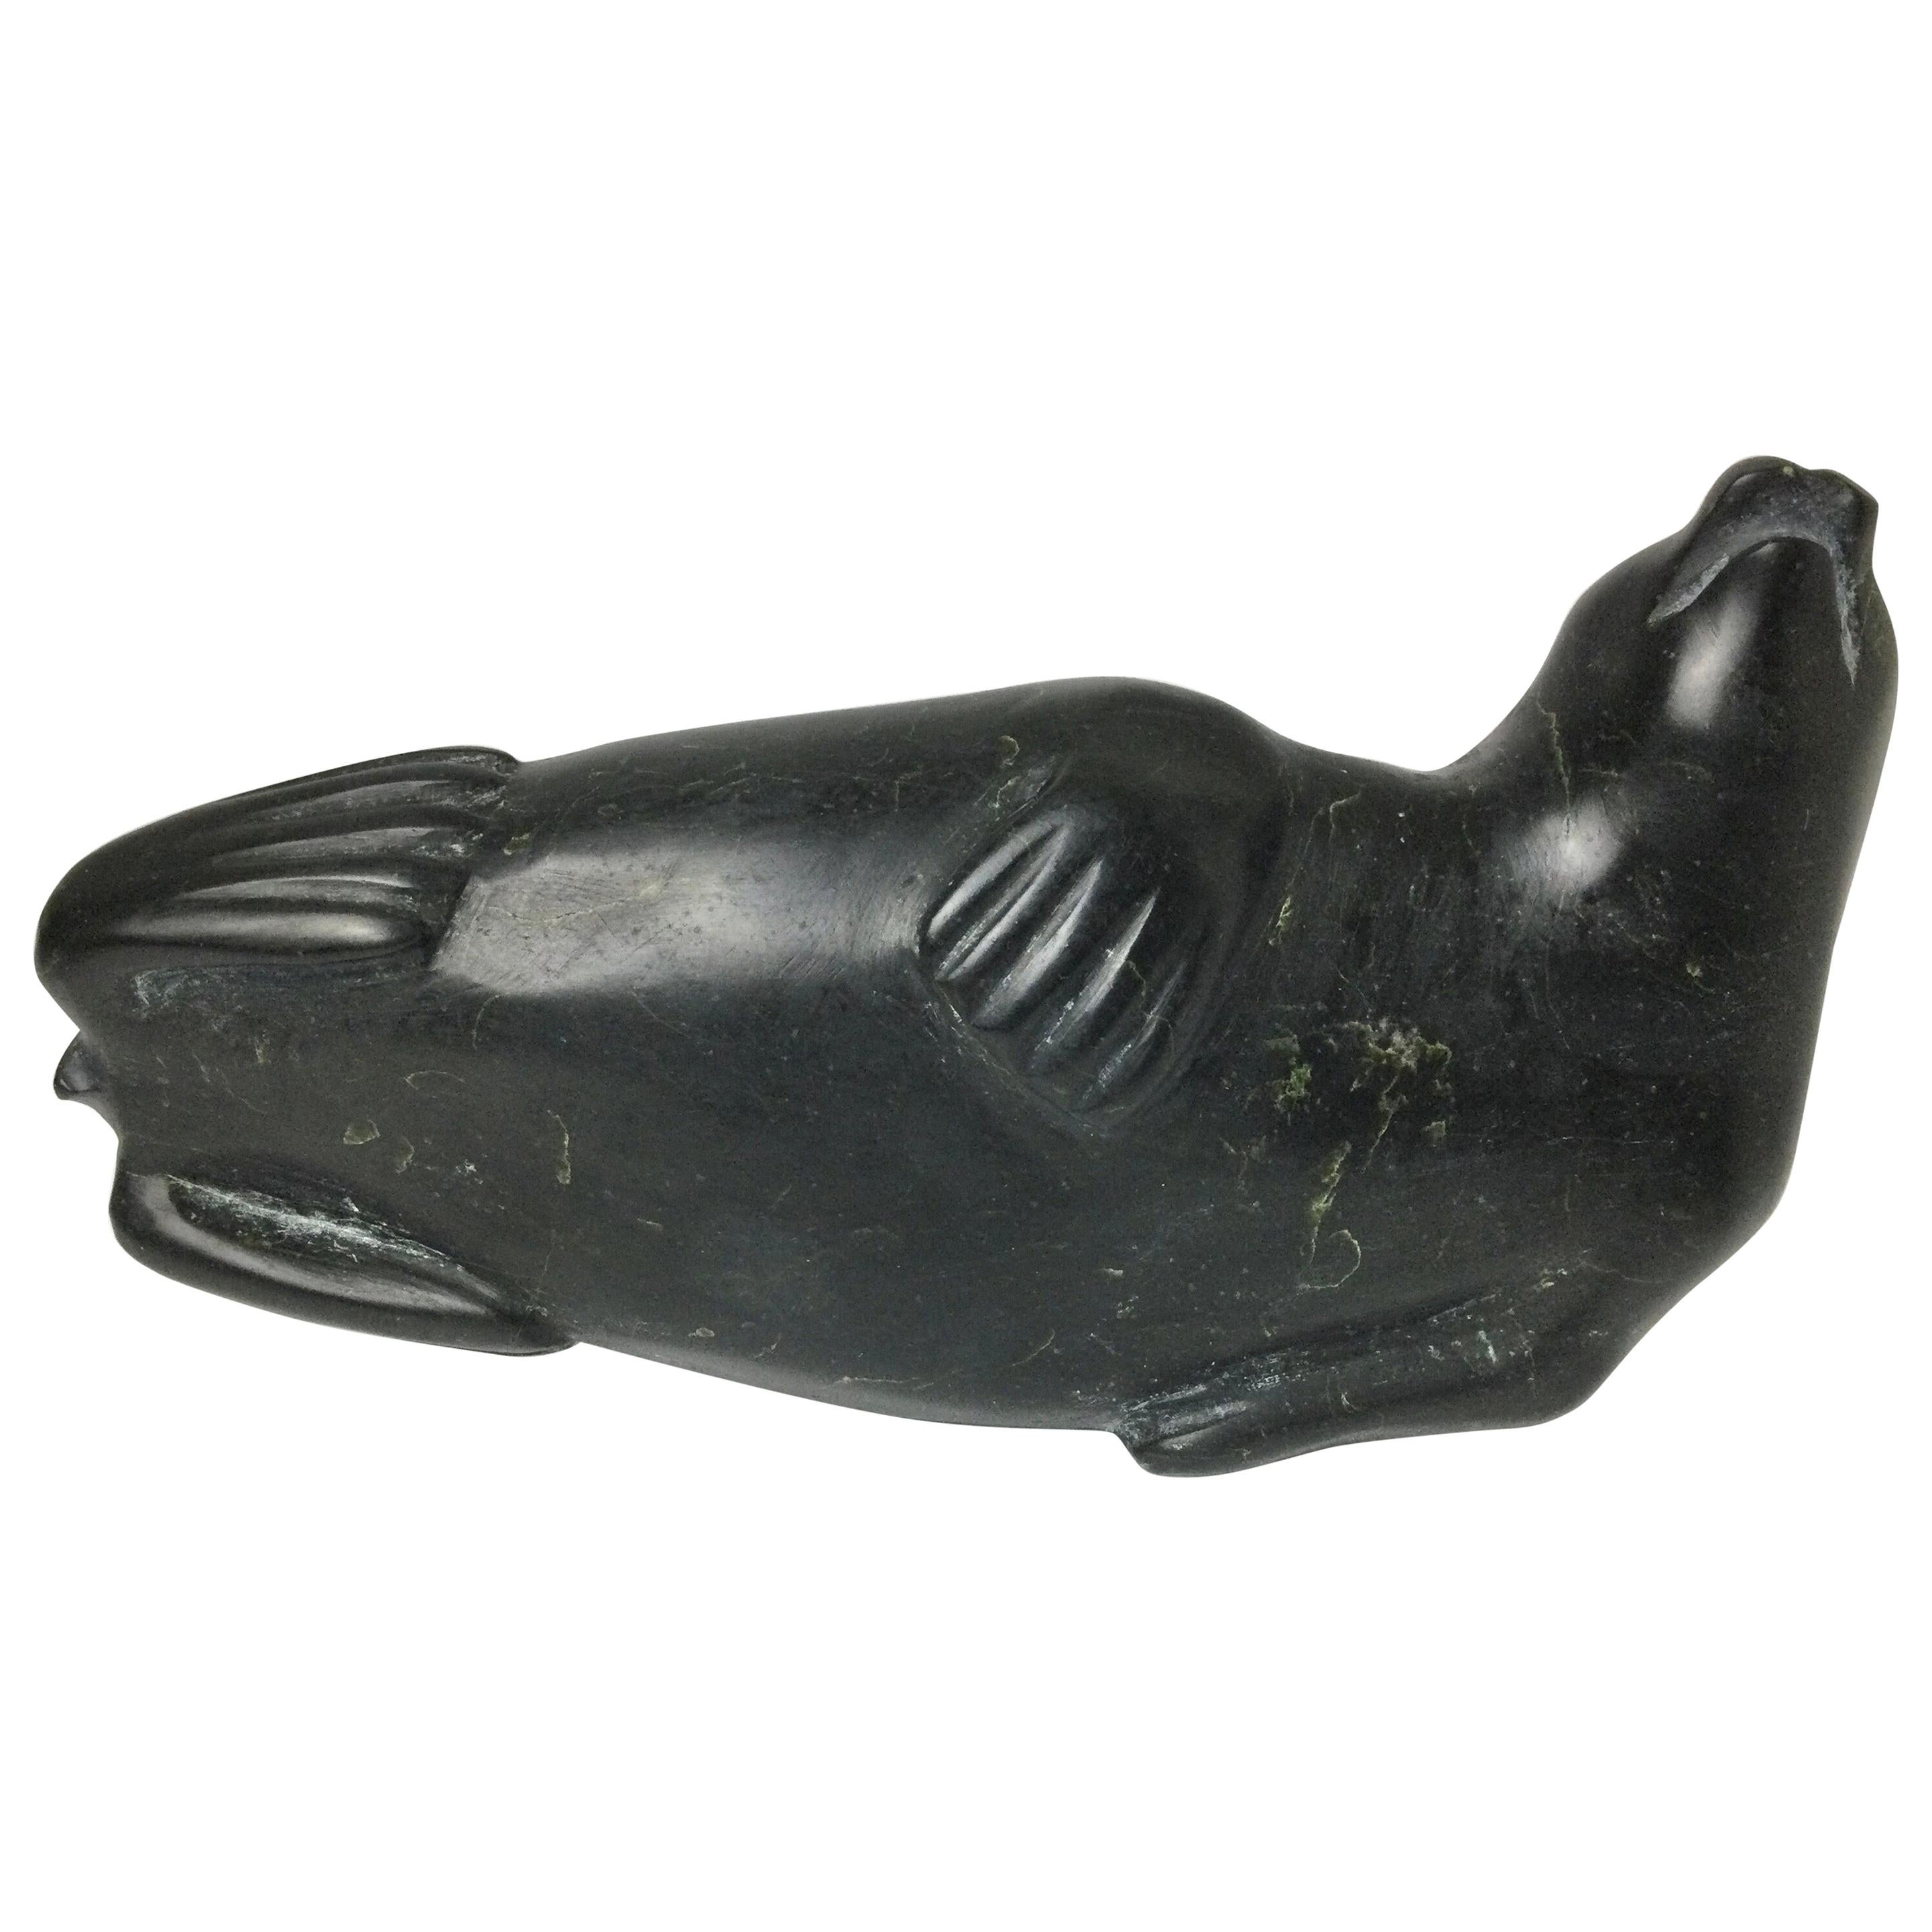 Inuit Eskimo Stone Carving of Seal